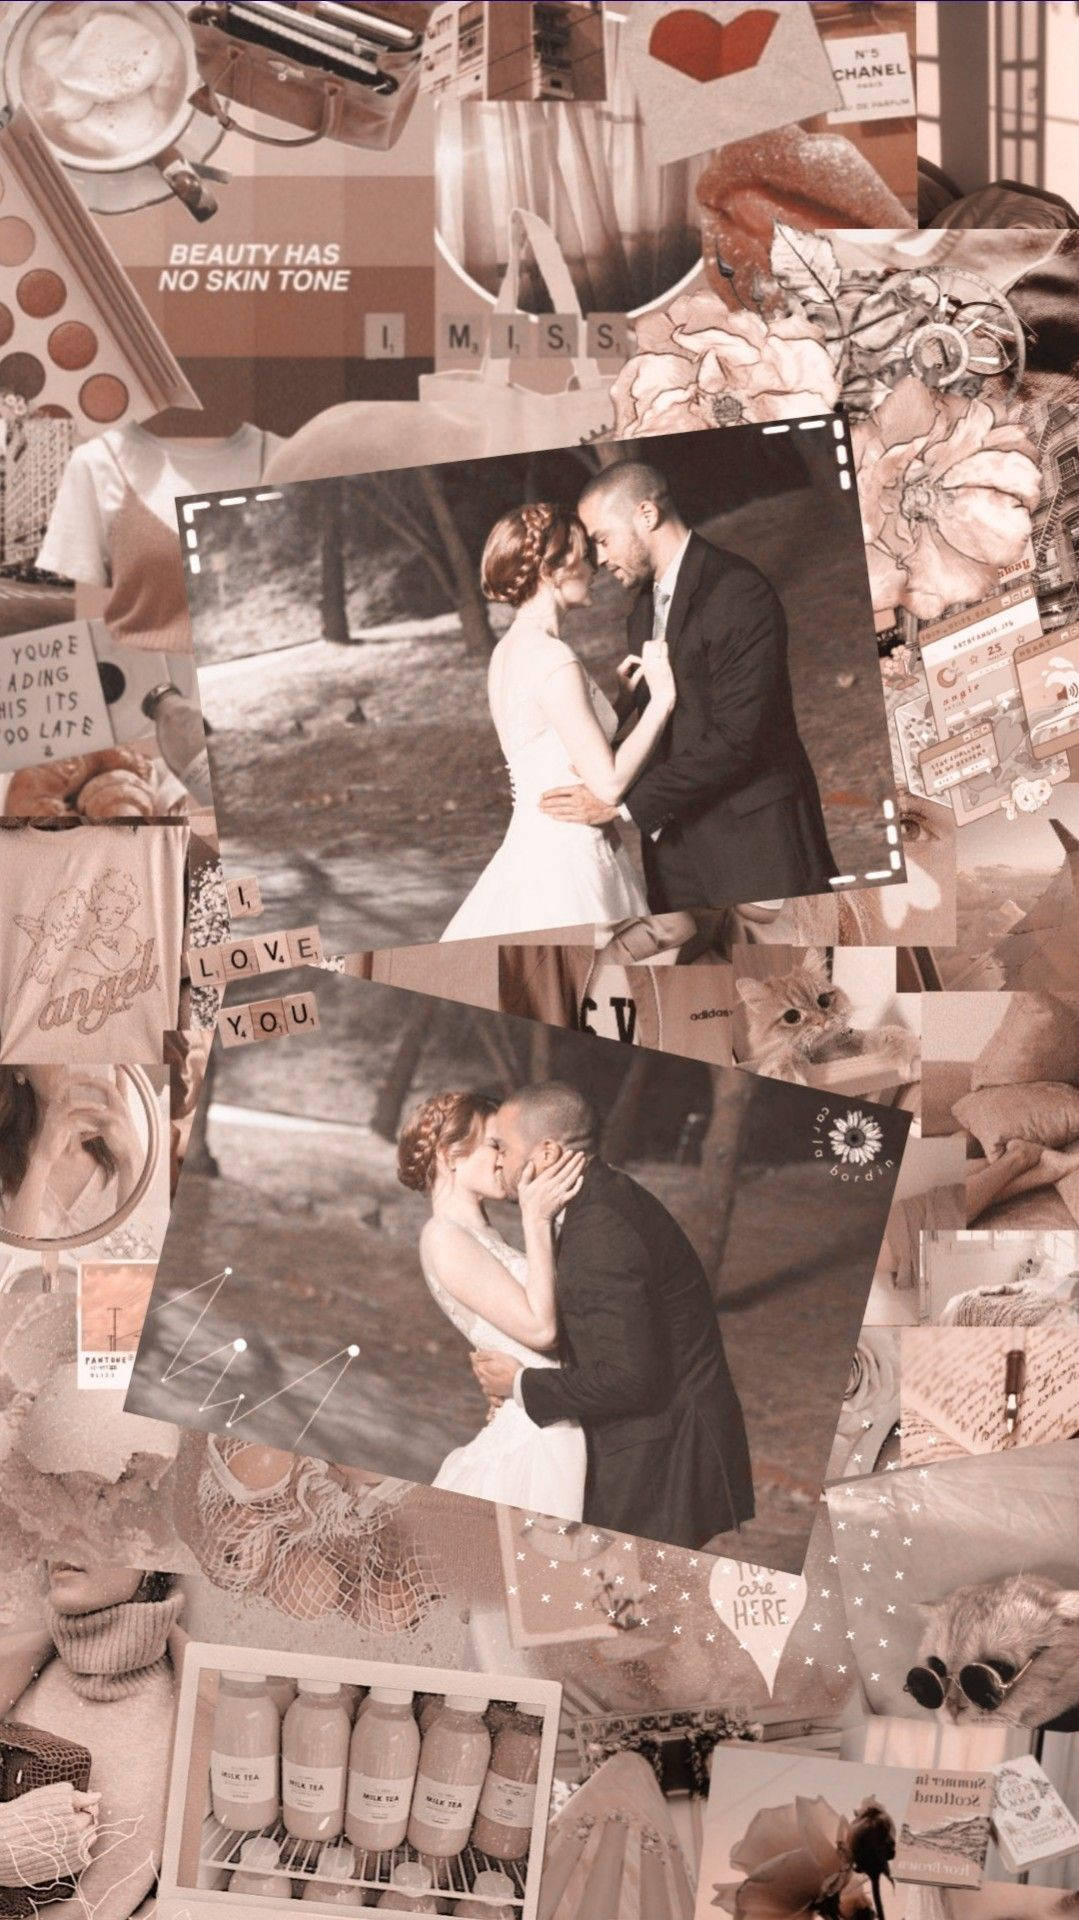 Aesthetic background of a couple kissing on their wedding day - Grey's Anatomy